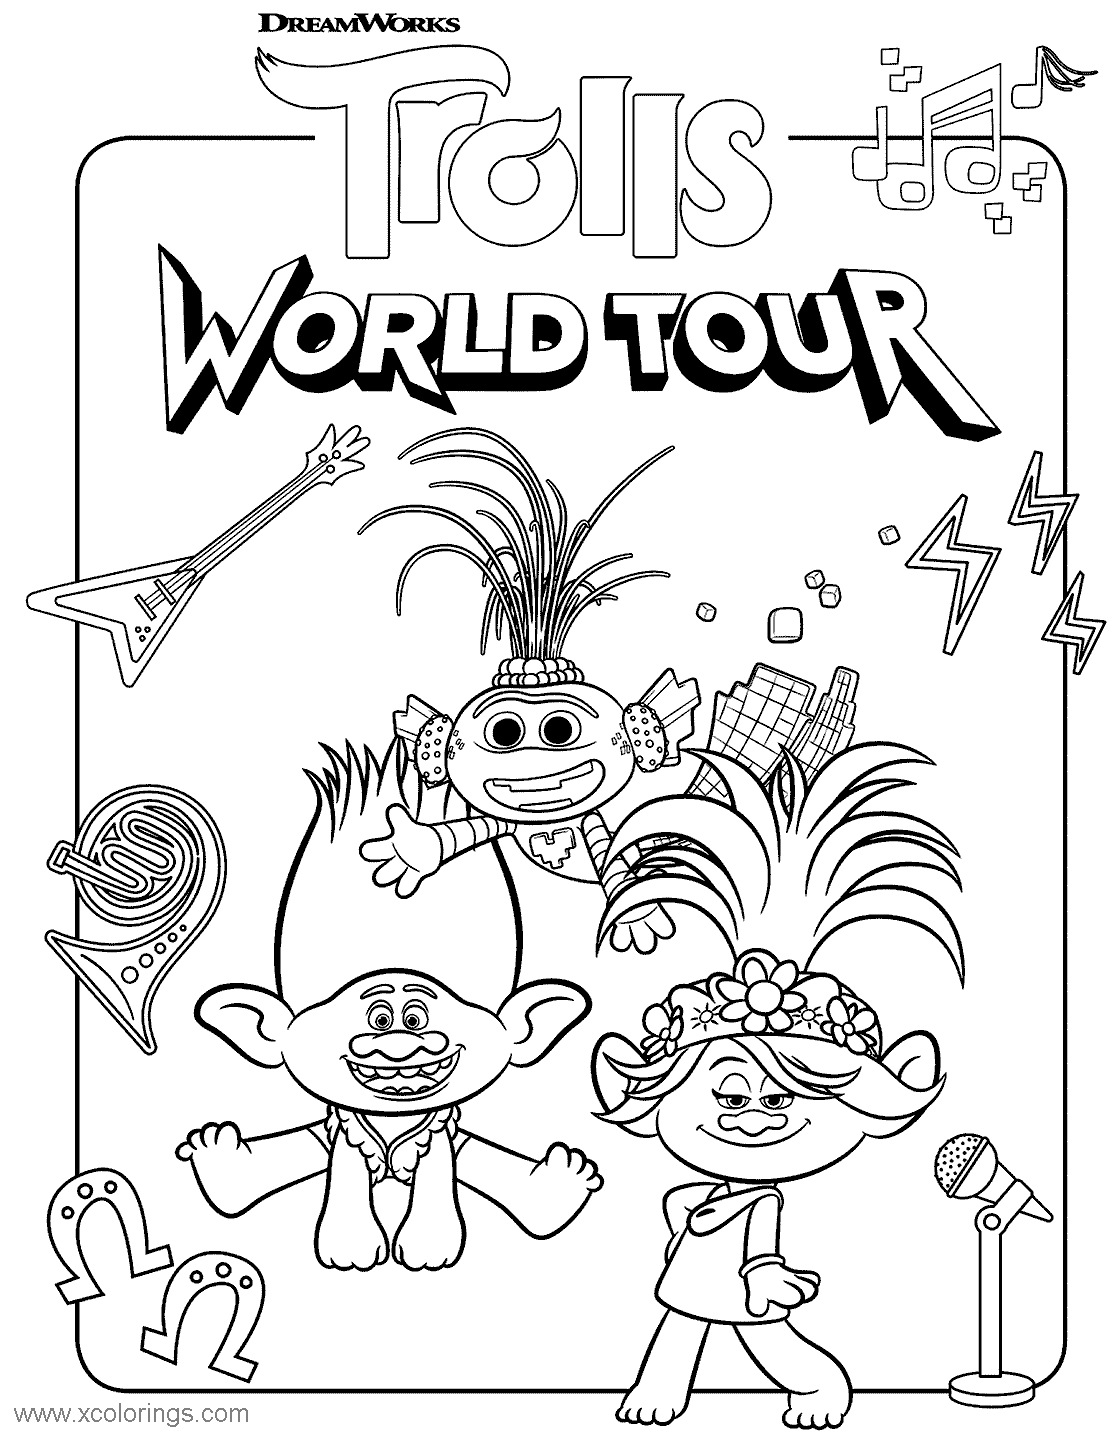 Free Characters from Trolls World Tour Coloring Pages printable